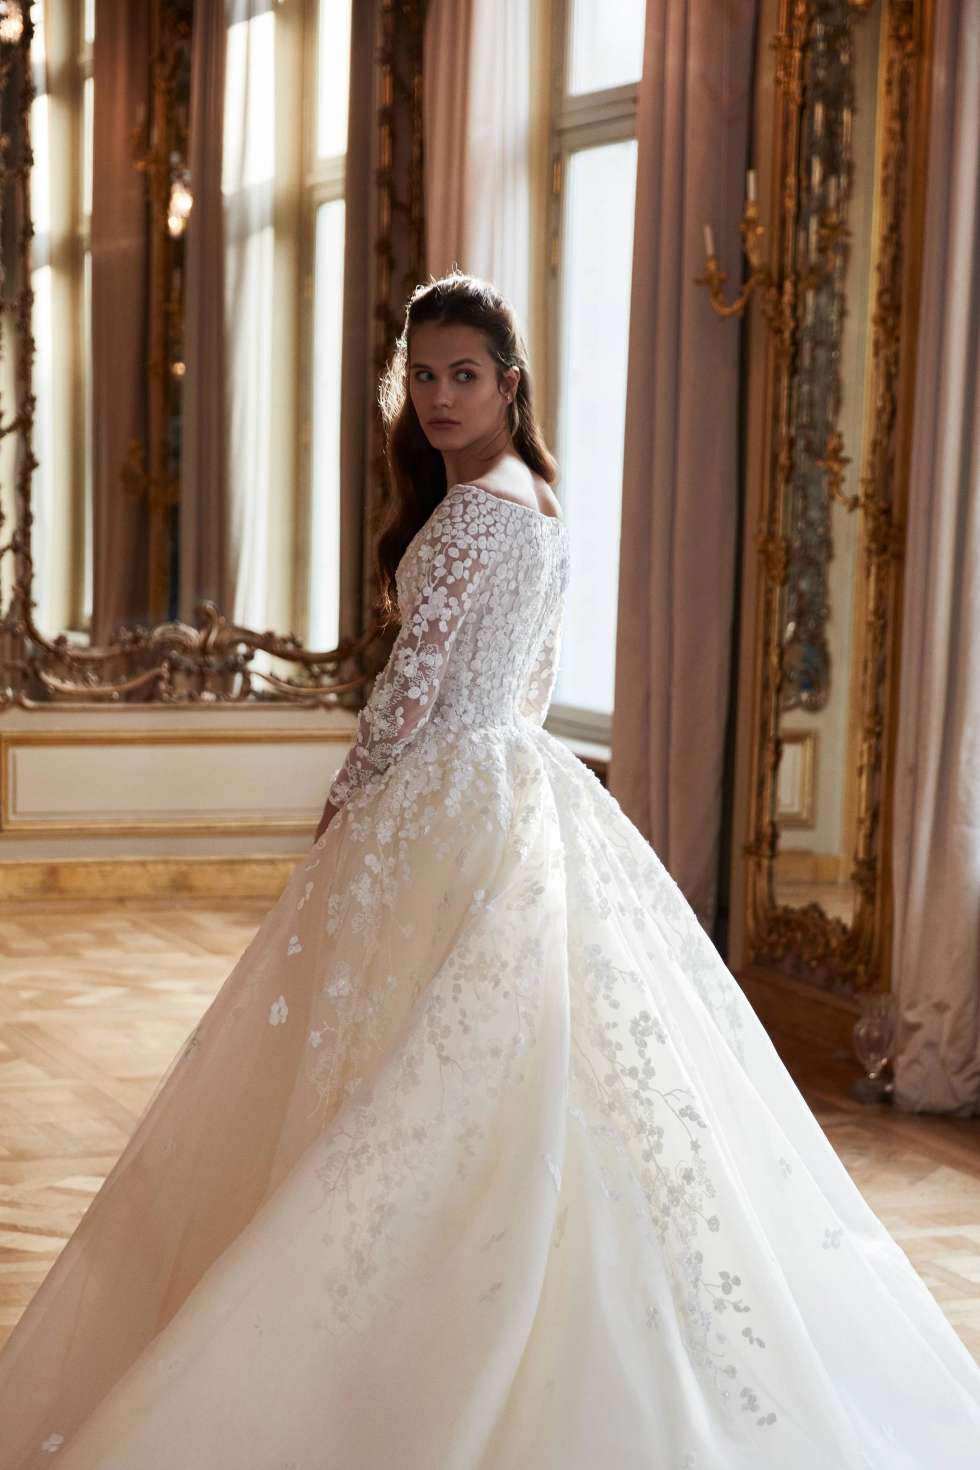 The Elie Saab Spring 2019 Wedding Dress Collection